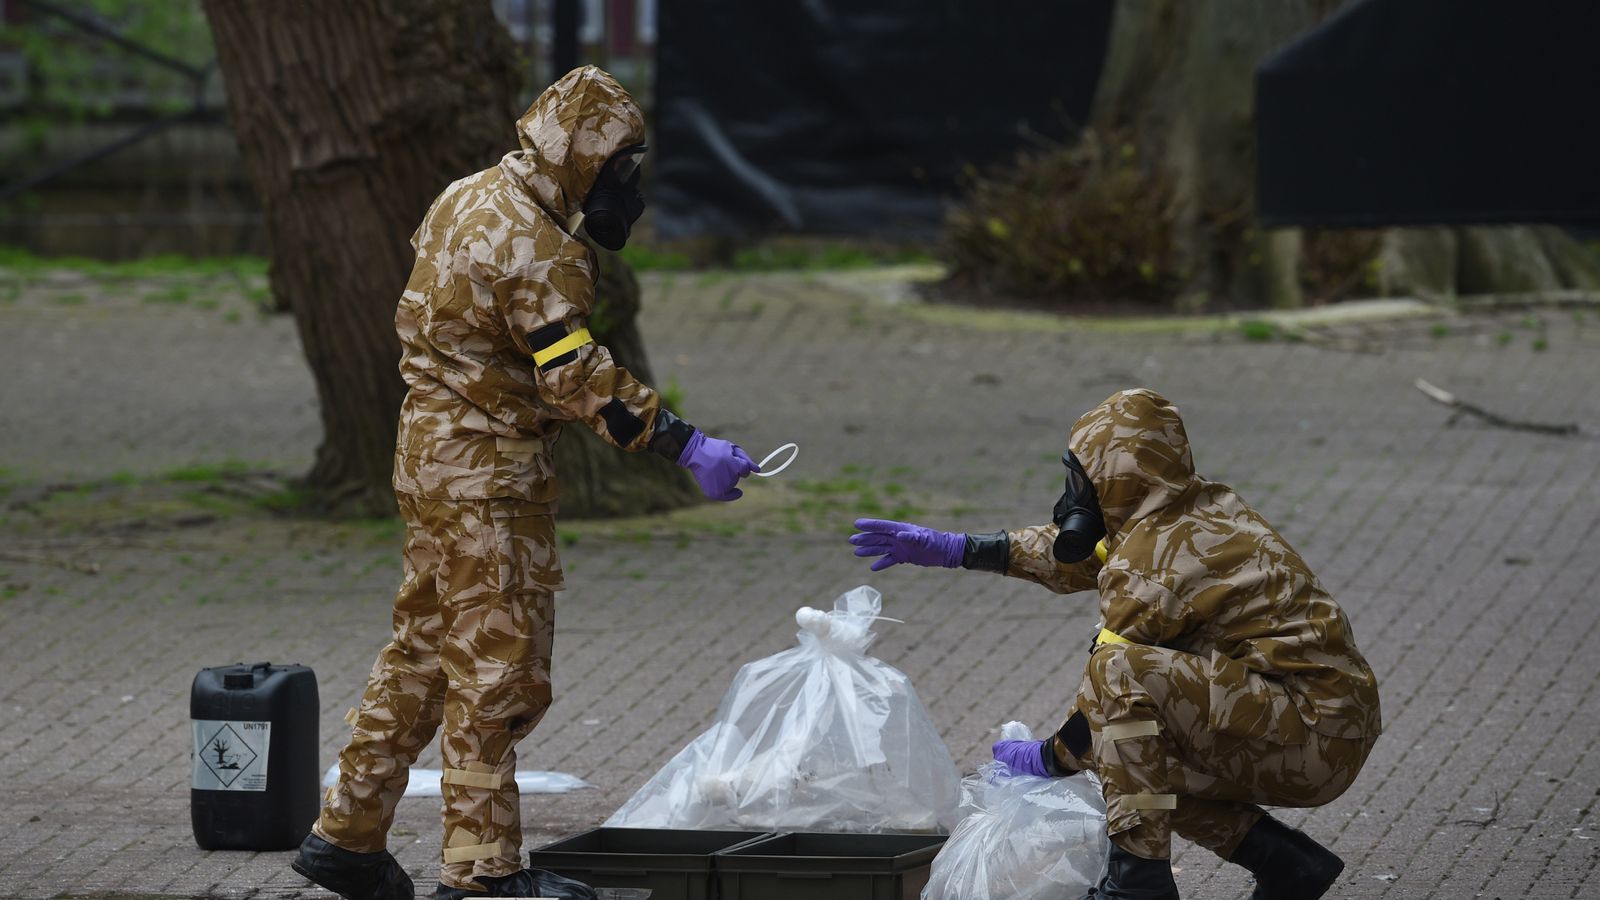 Salisbury Poisoning 2300 Objects Recovered And 4000 Hours Of Cctv 